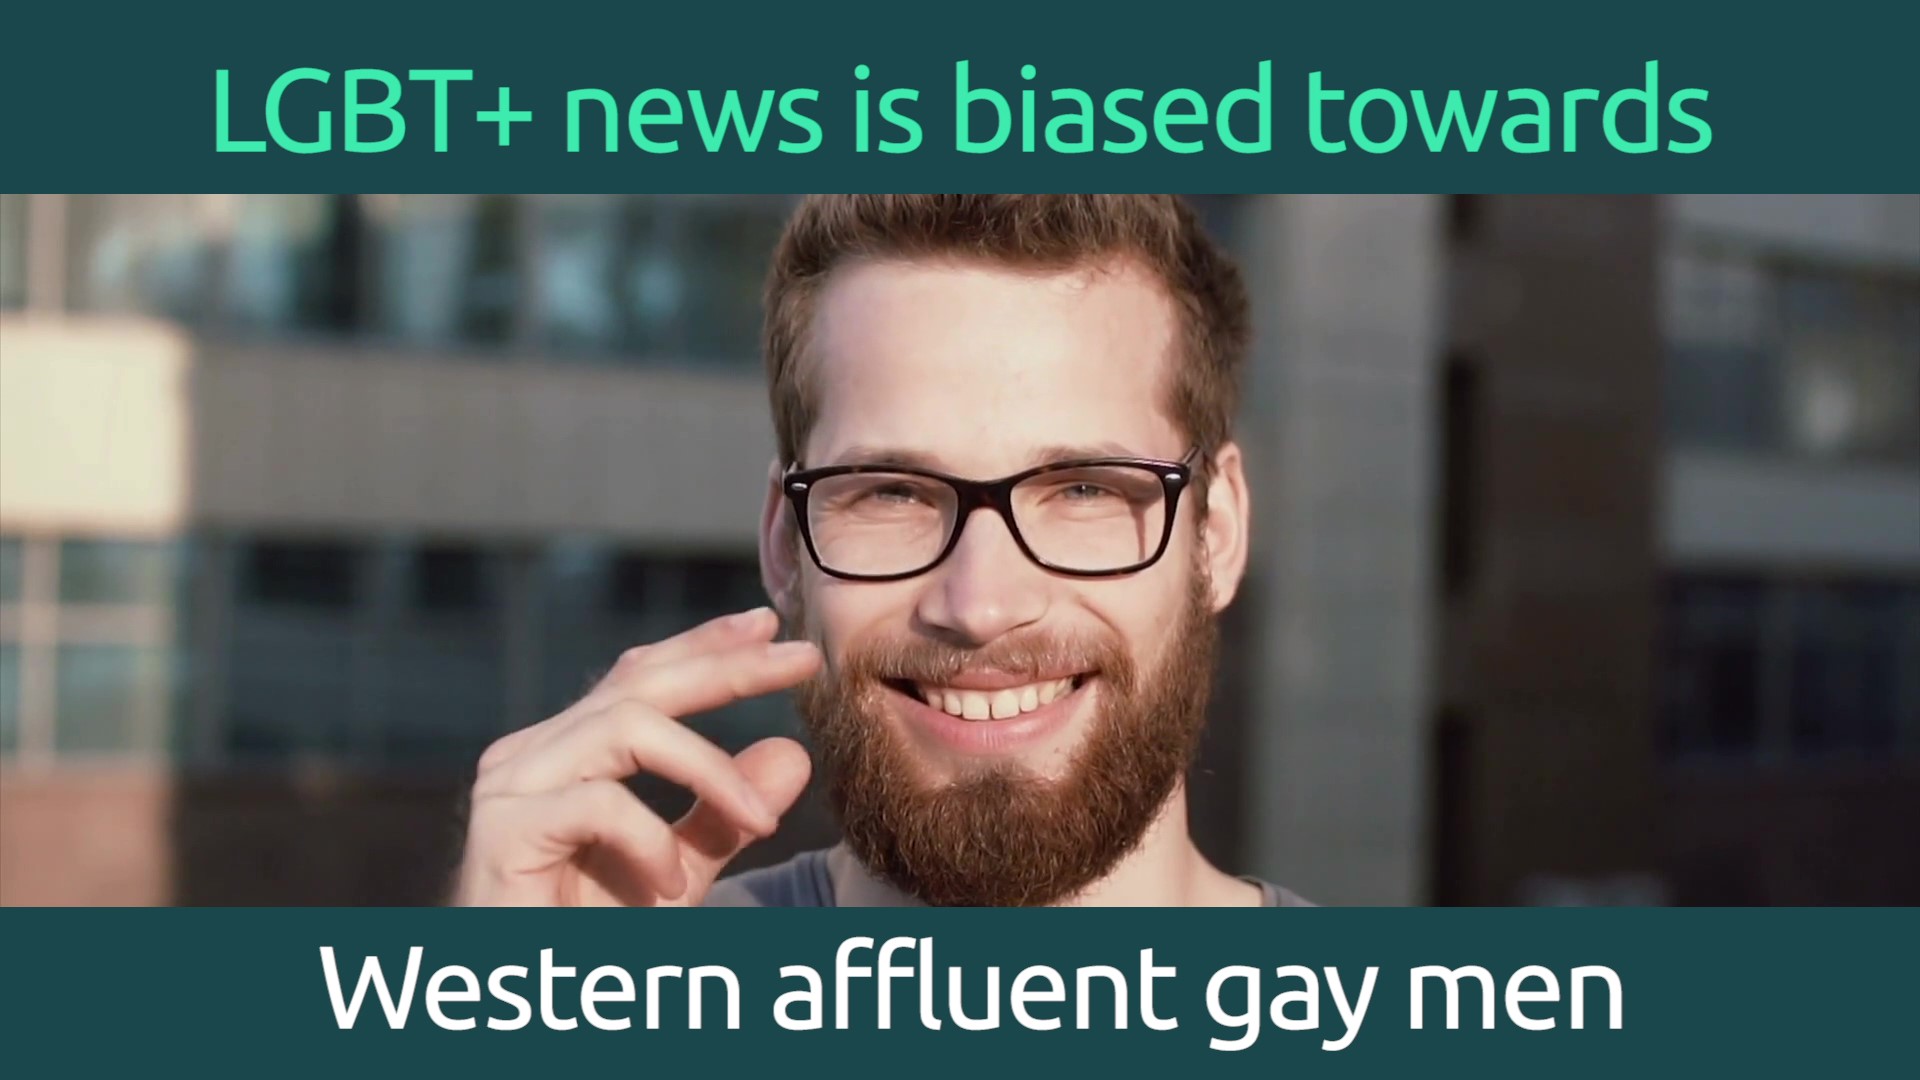 Text on LGBT+ news is biased towards western affluent gay men